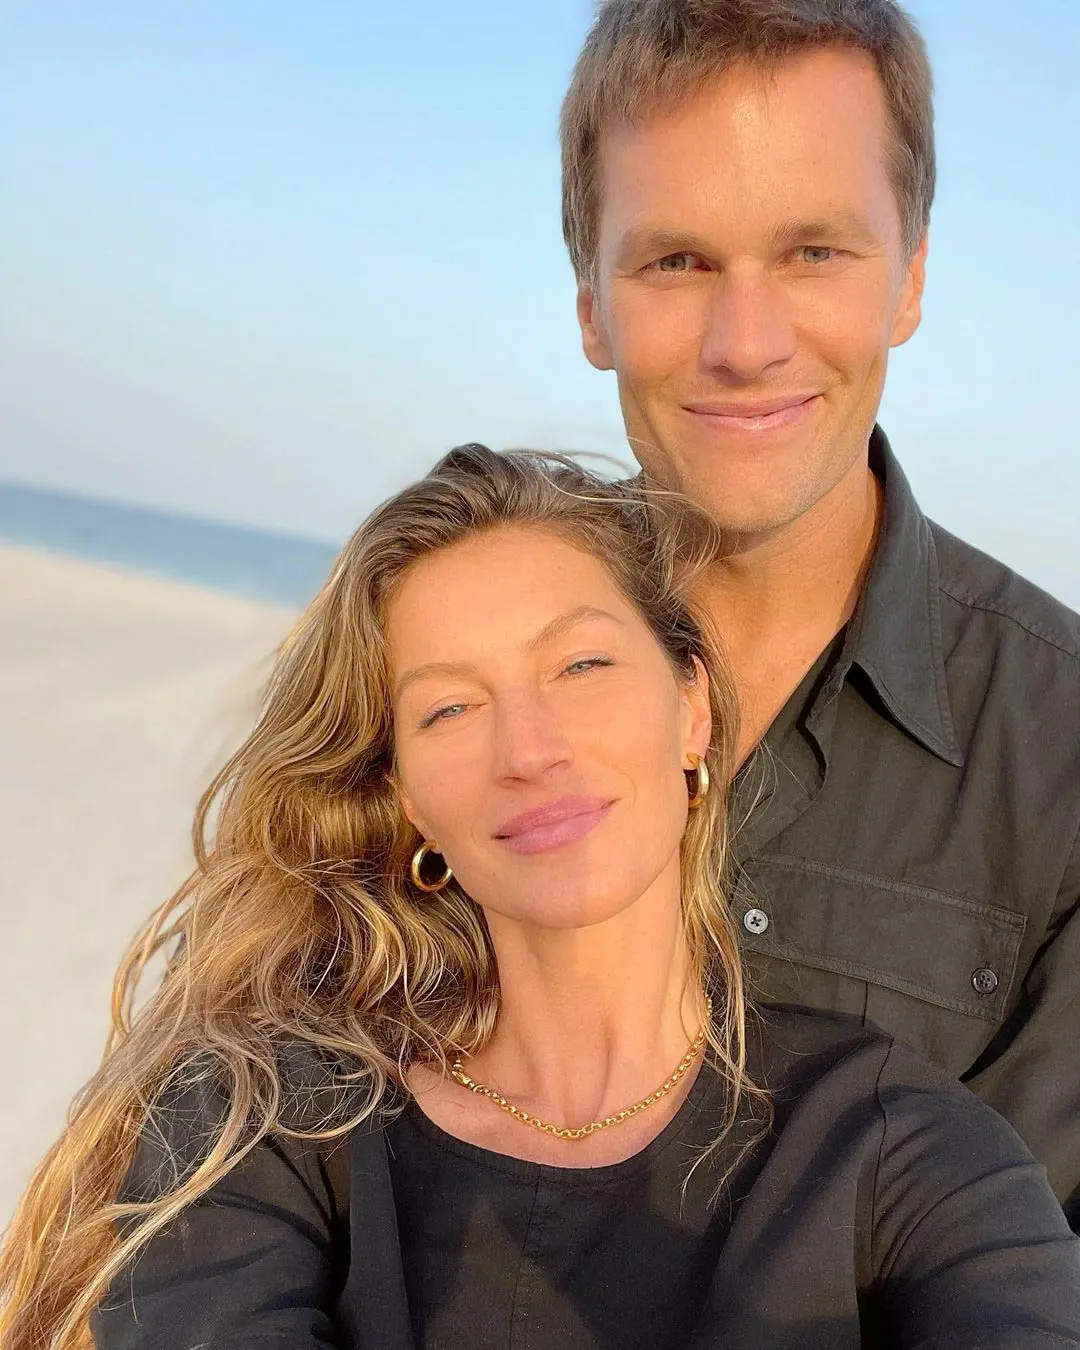 You've Been Saying It Wrong! Here’s How to Pronounce Gisele Bündchen's Name Correctly